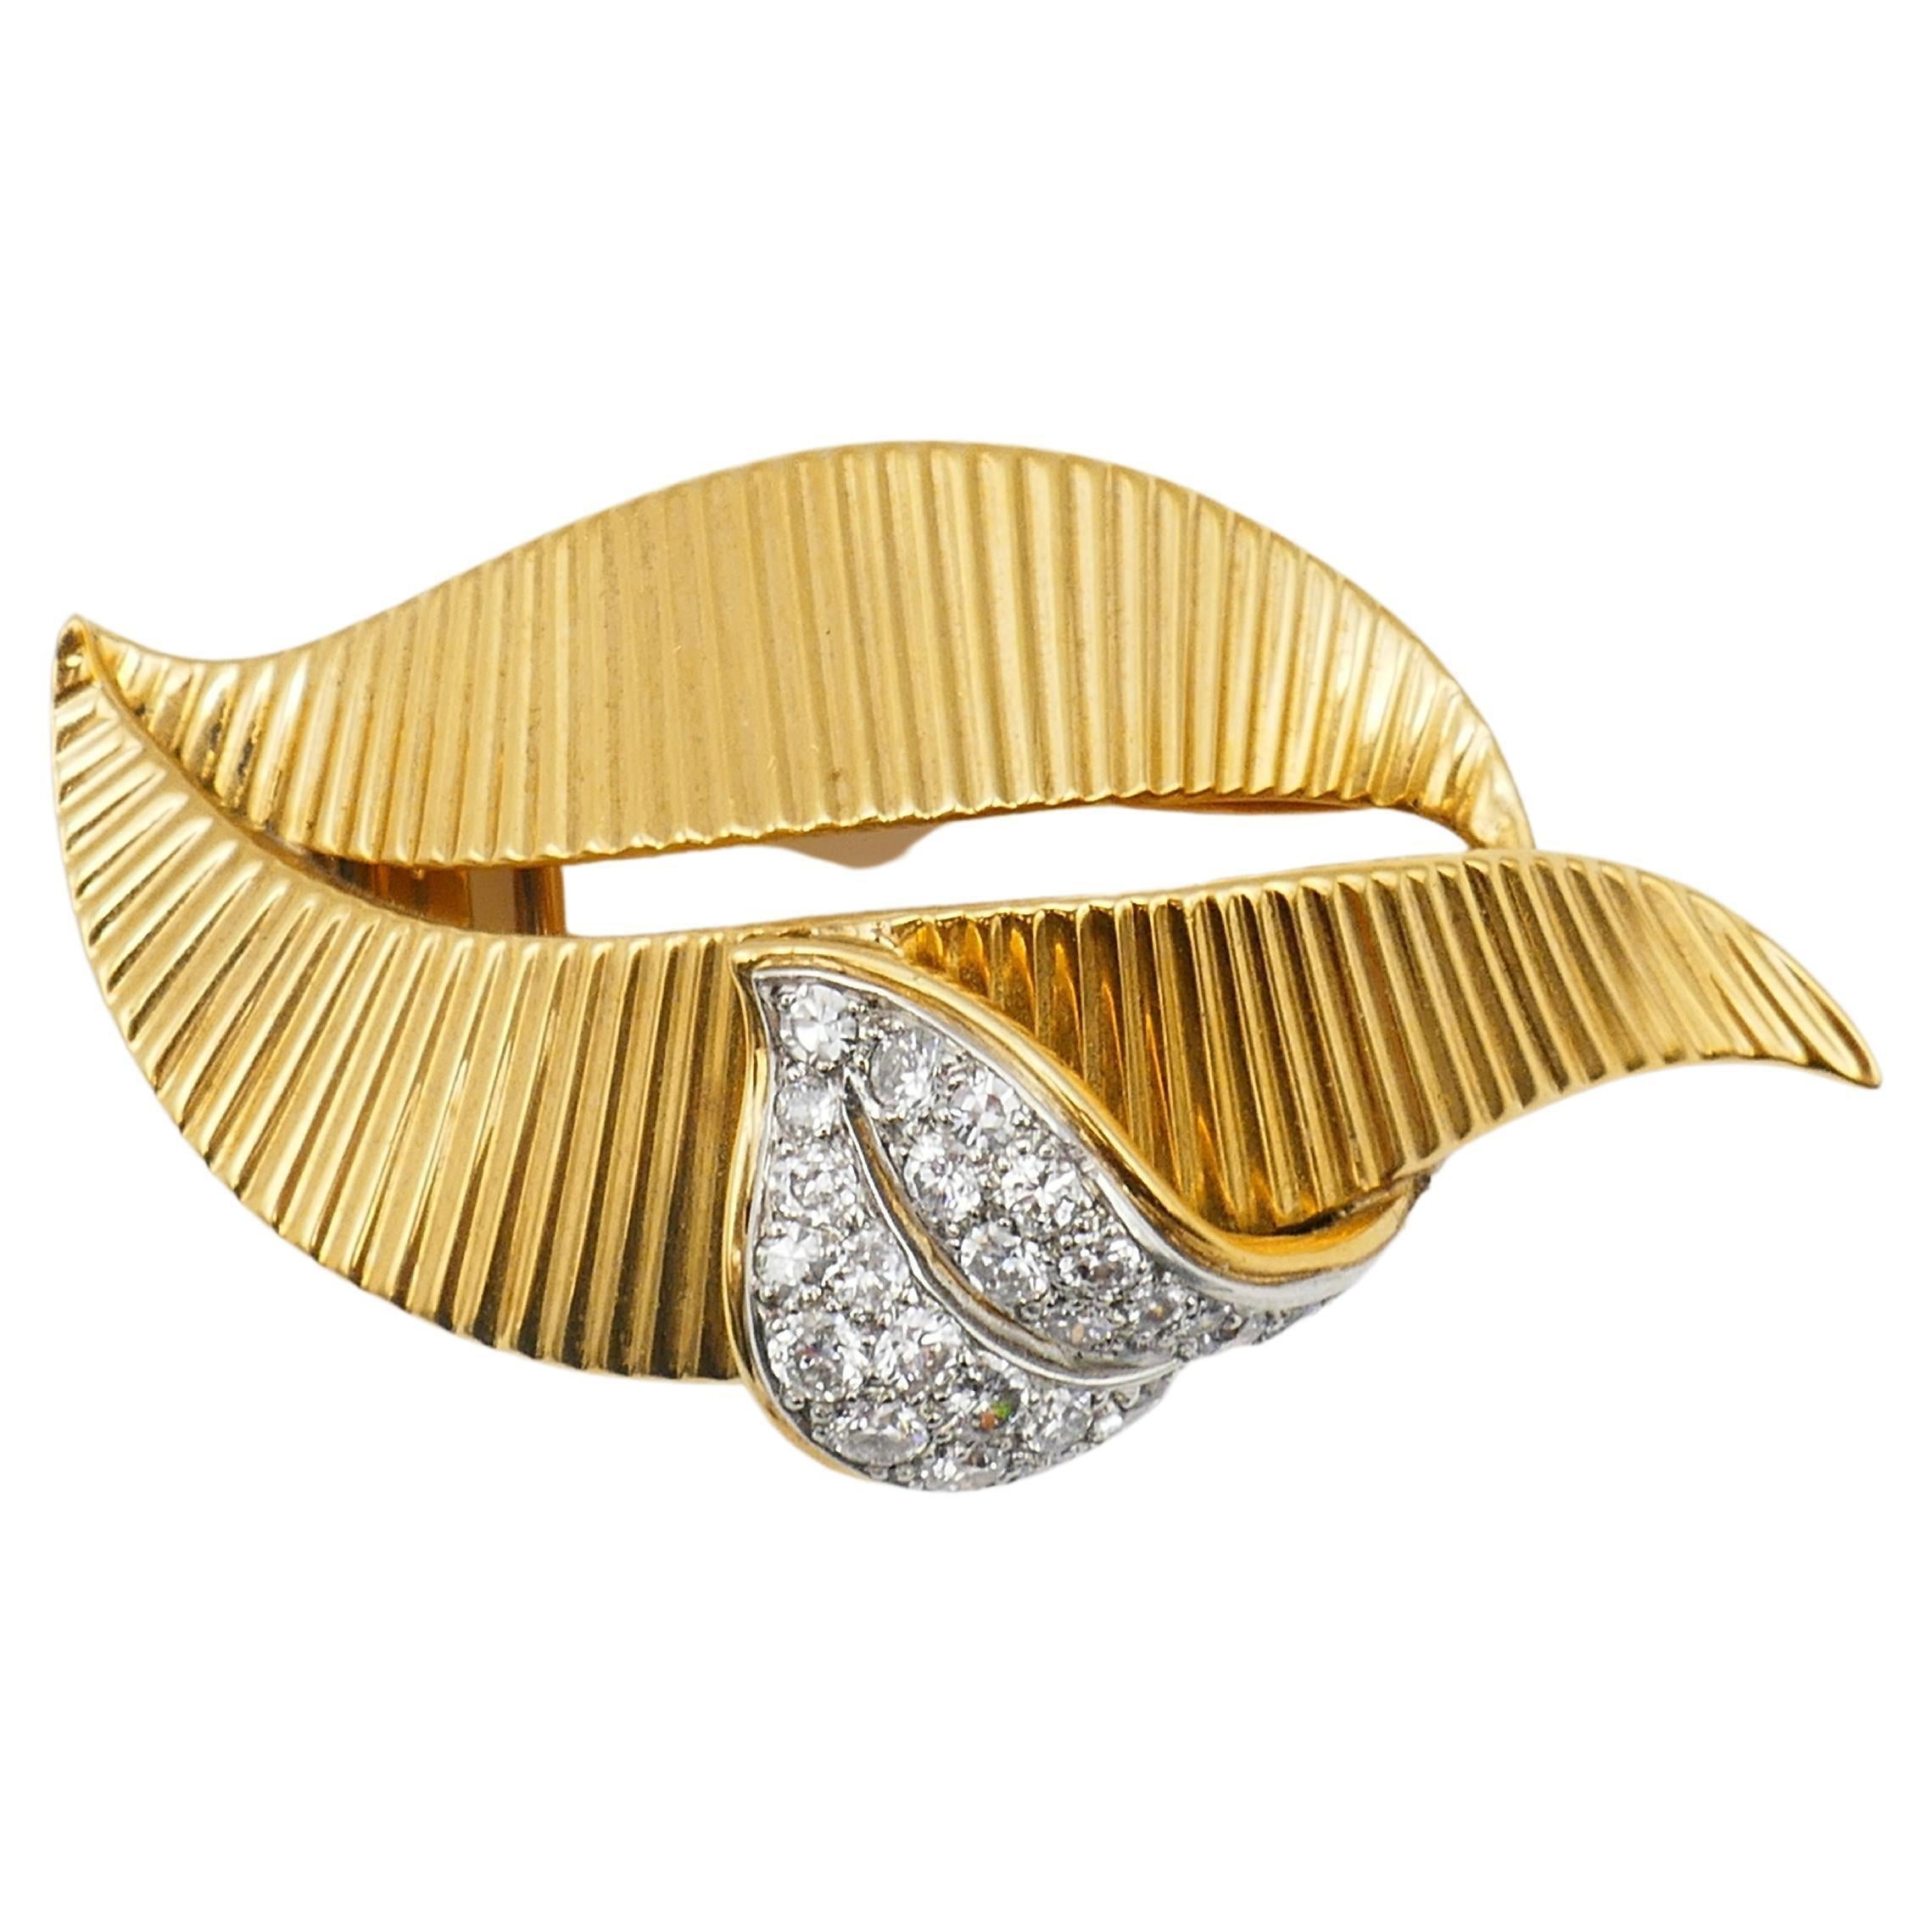 Vintage Cartier brooch made of 18k gold, featuring diamond.
A leafy motif comprises of two ribbed gold elements. A part on top of the 